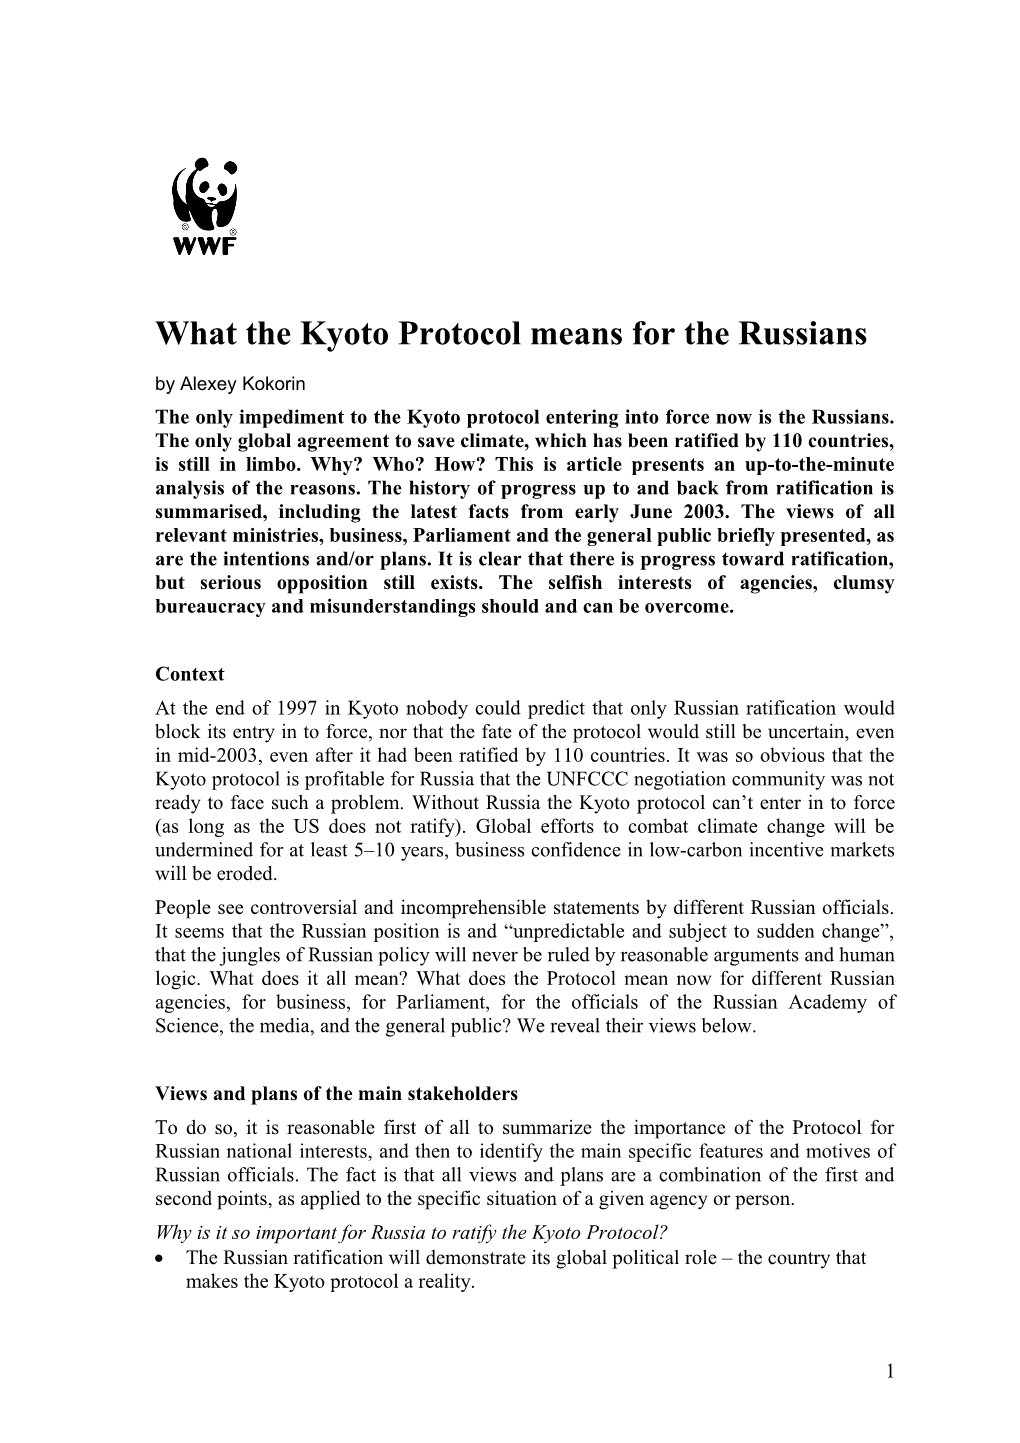 What Is Kyoto Protocol for Russians